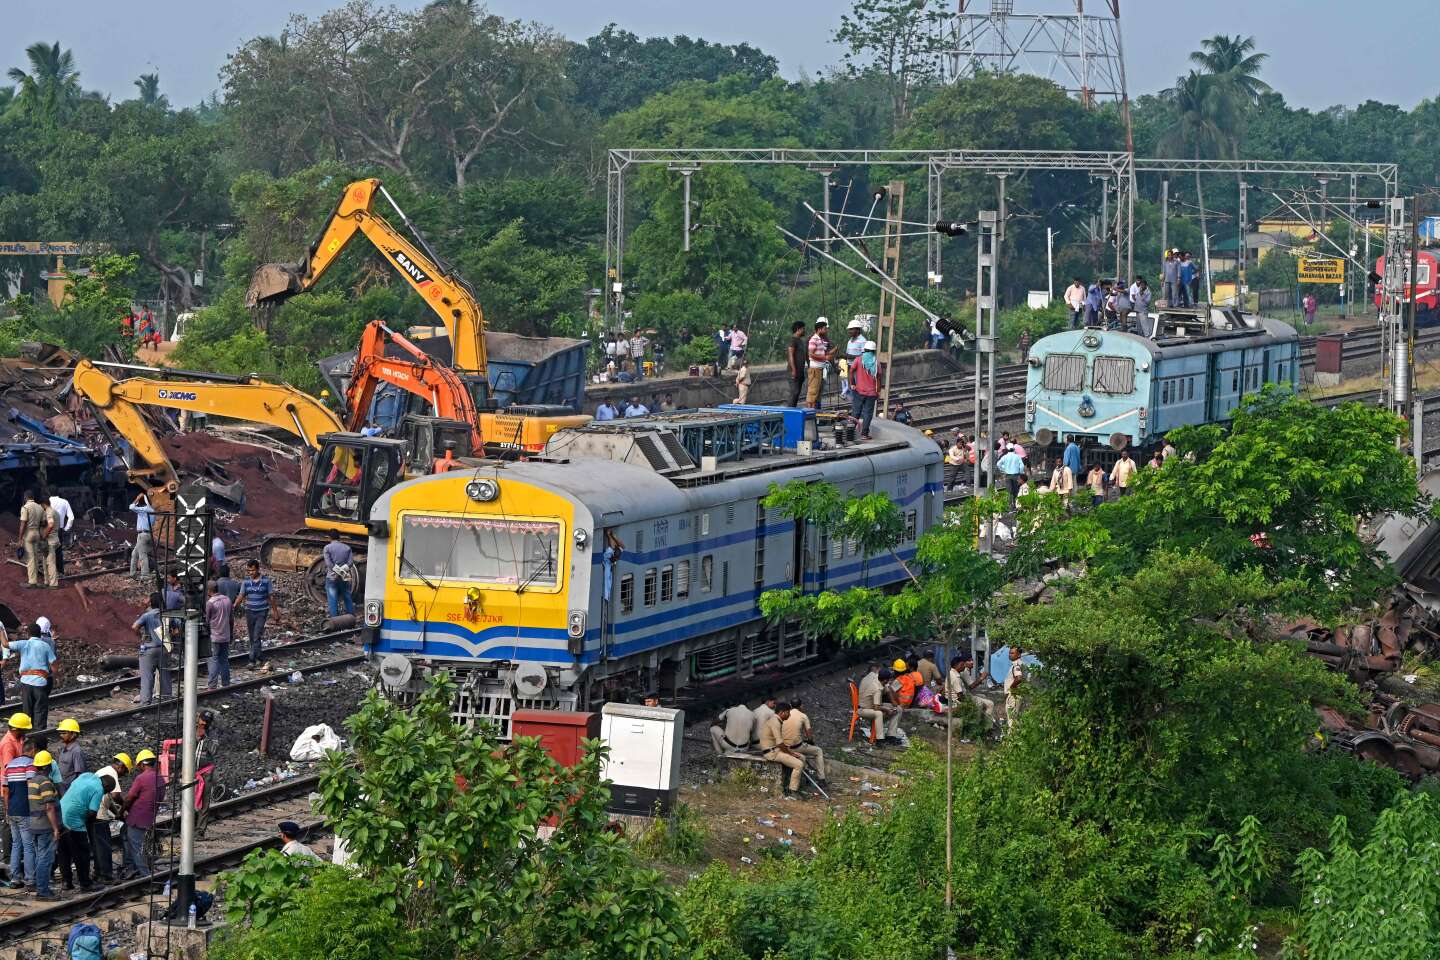 Indian government says cause of train crash identified